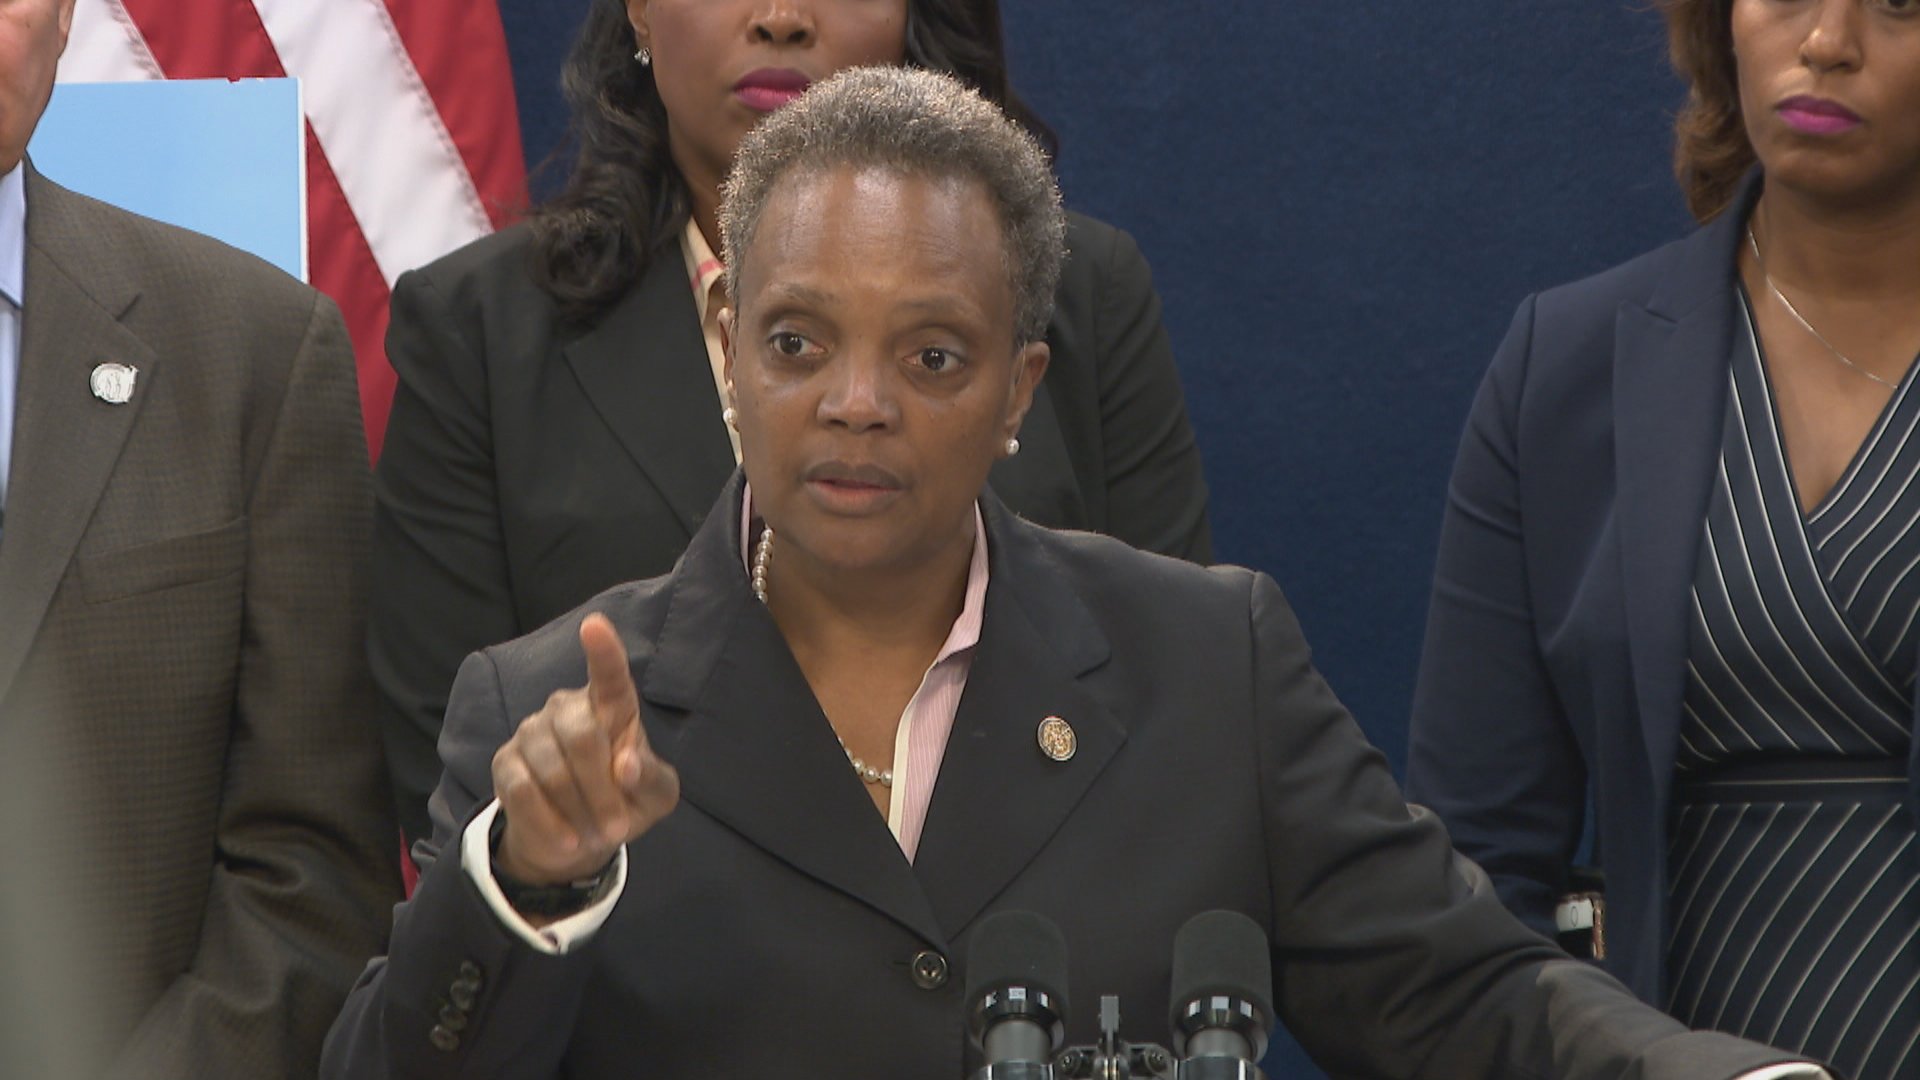 On Monday, Oct. 7, 2019, Mayor Lori Lightfoot said the Chicago Teachers Union must offer a comprehensive response to the city’s contract proposal before bargaining can move forward. (WTTW News)